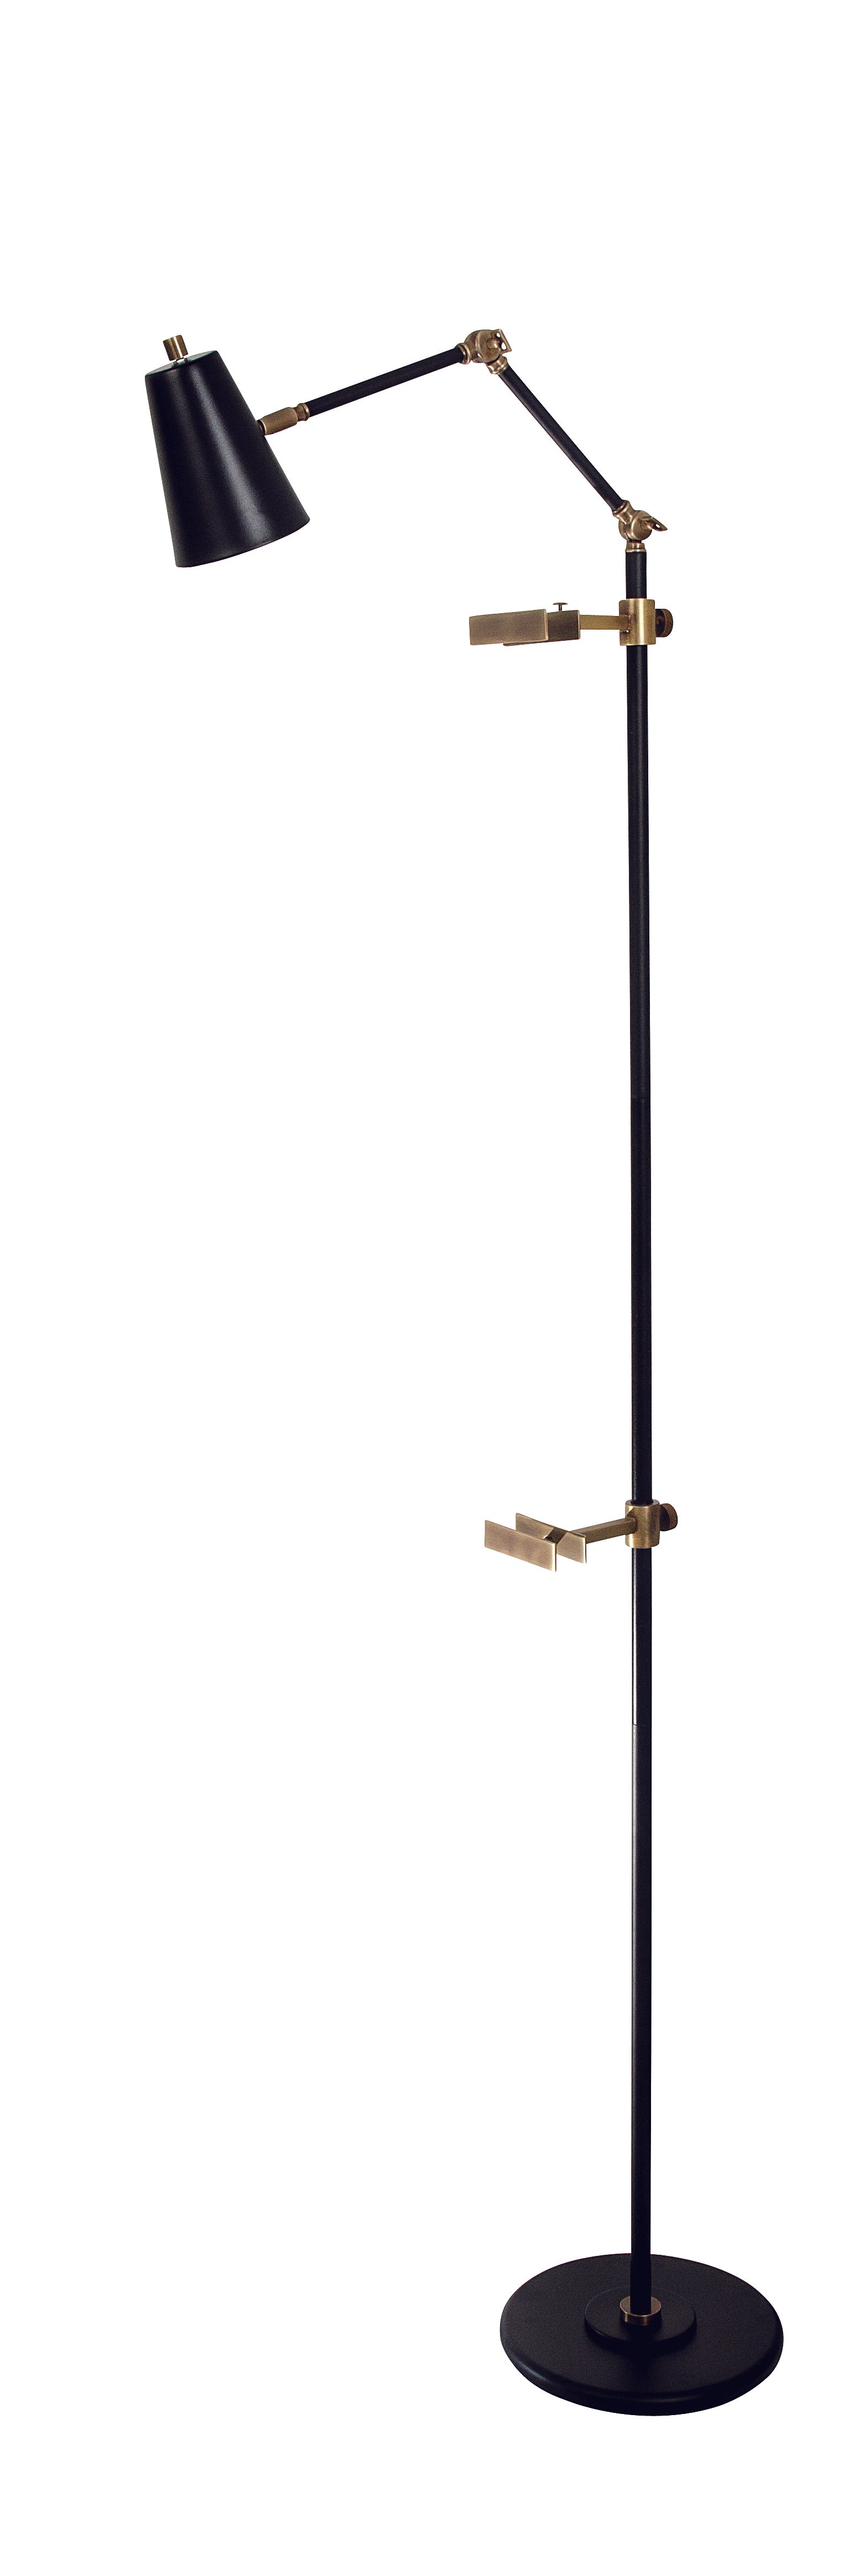 House of Troy River North Easel Floor Lamp Black Antique Brass Accents Spot Light RN301-BLK-AB